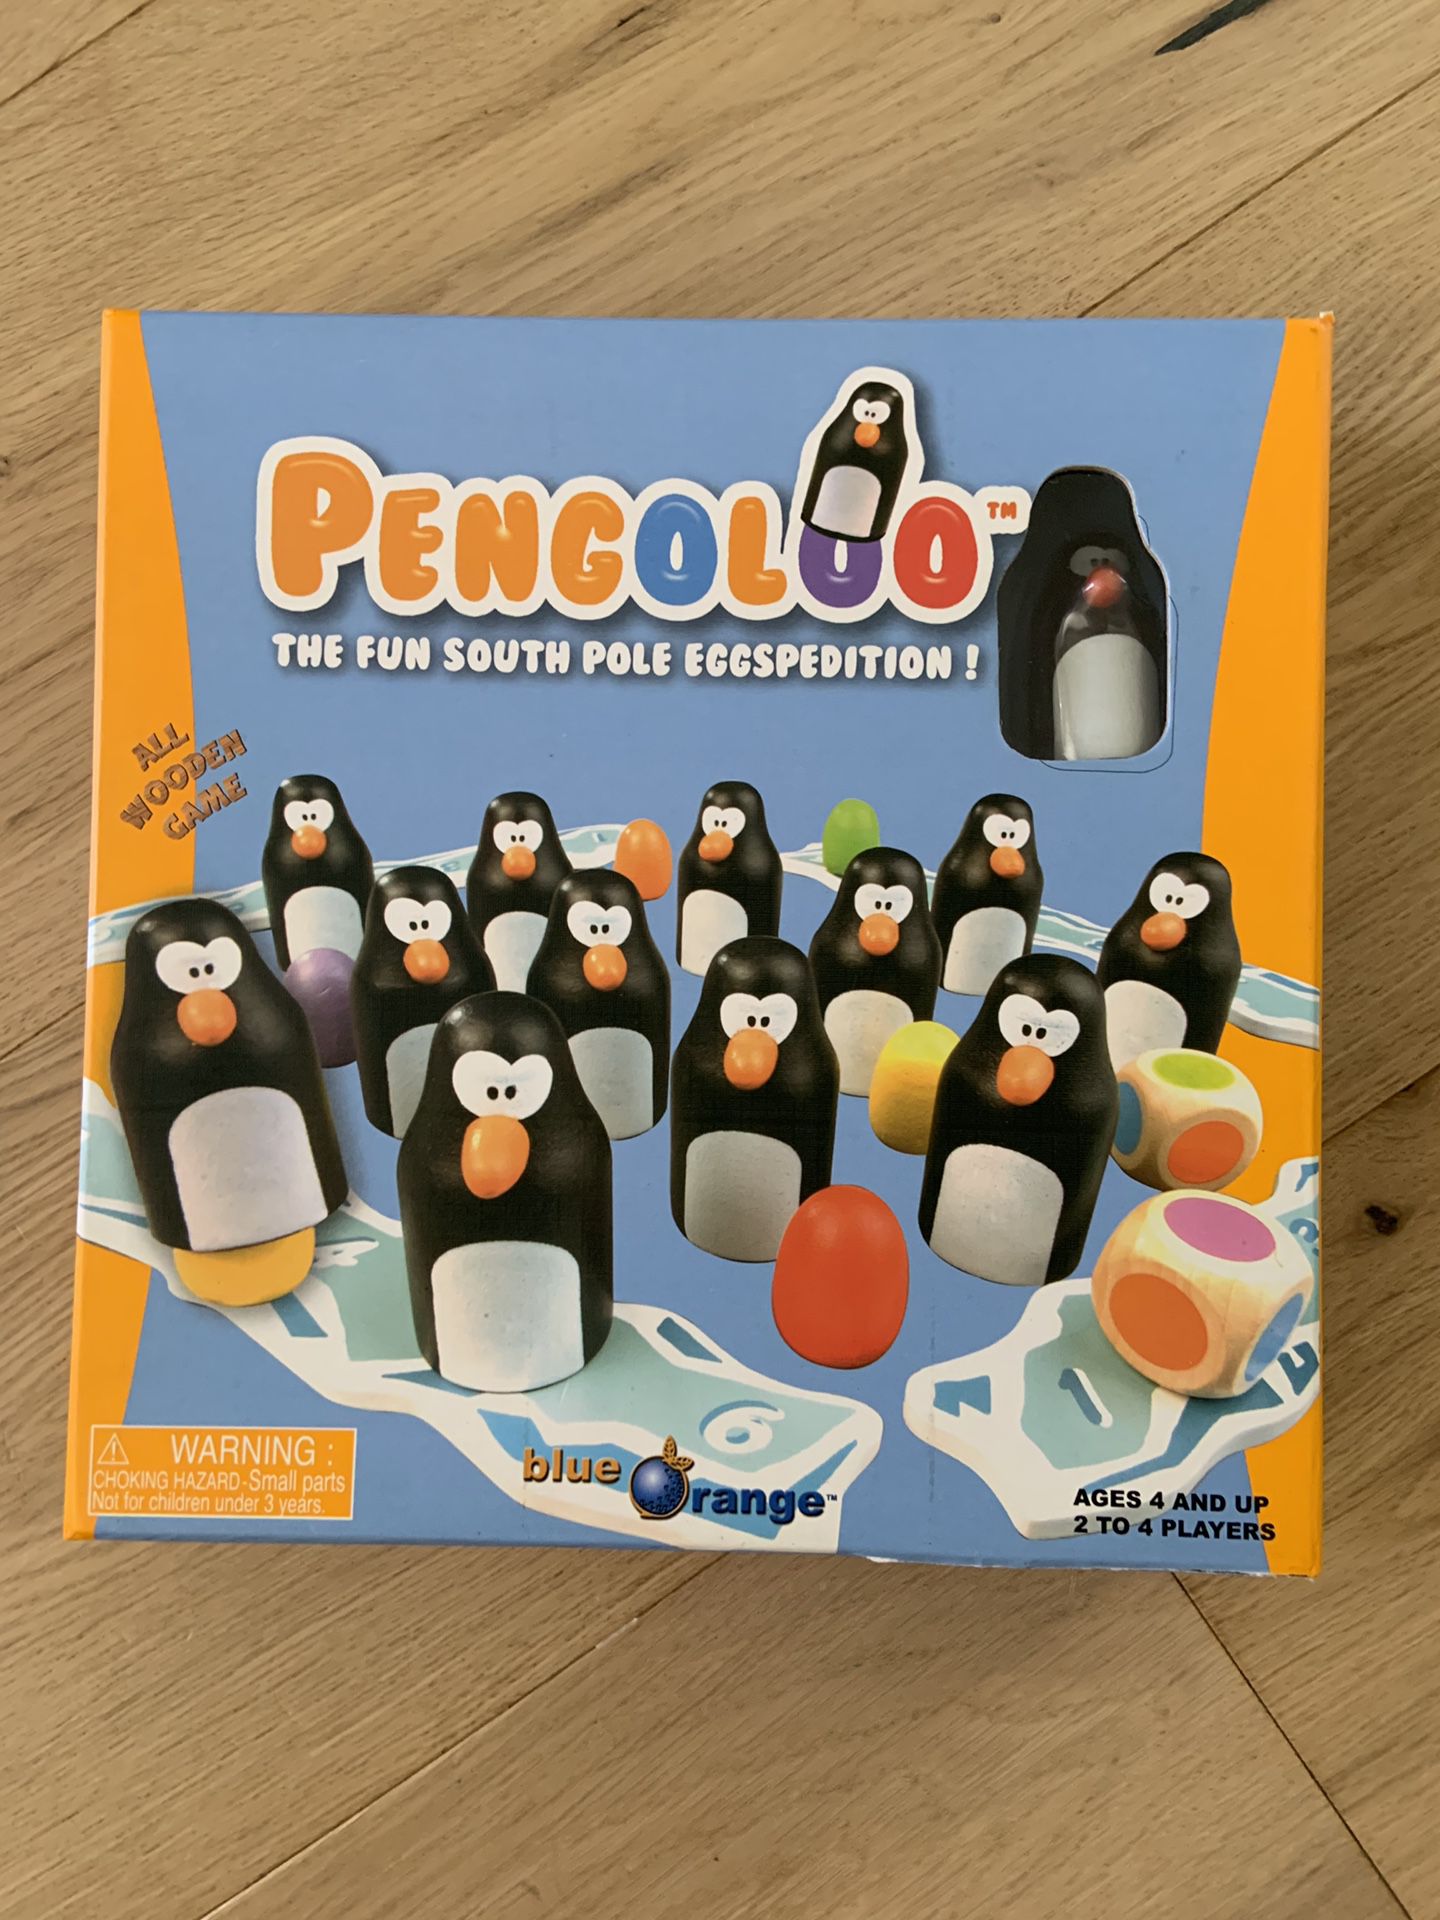 Pengoloo board game for kids